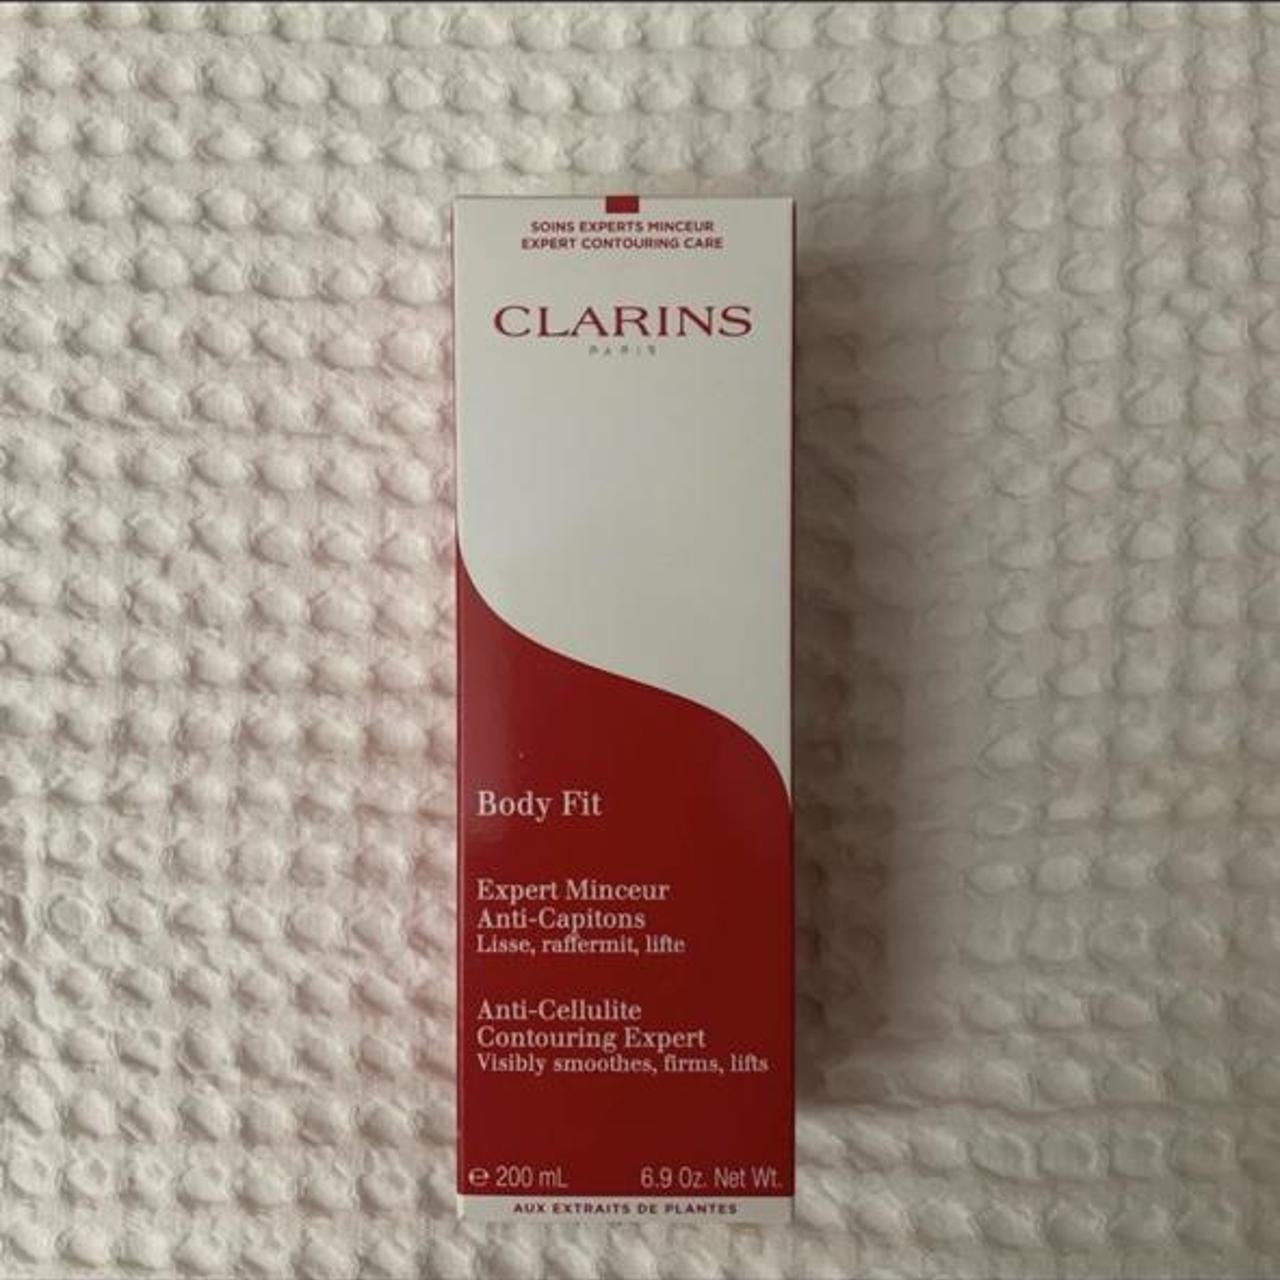 Product Image 2 - Clarins Body Fit
Unopened and in